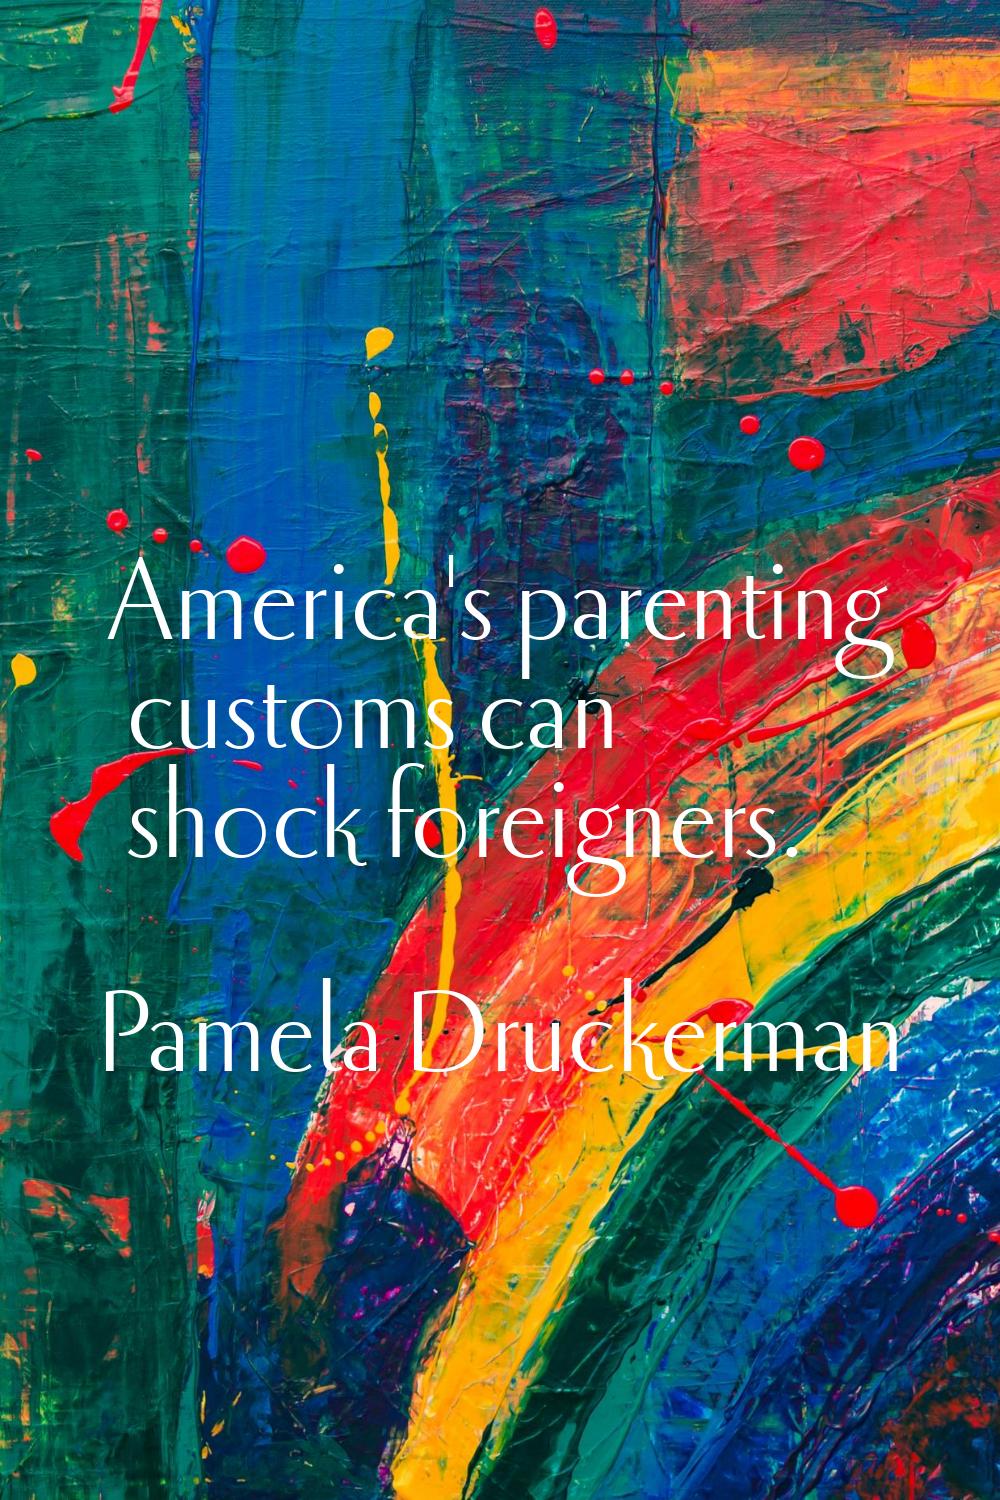 America's parenting customs can shock foreigners.